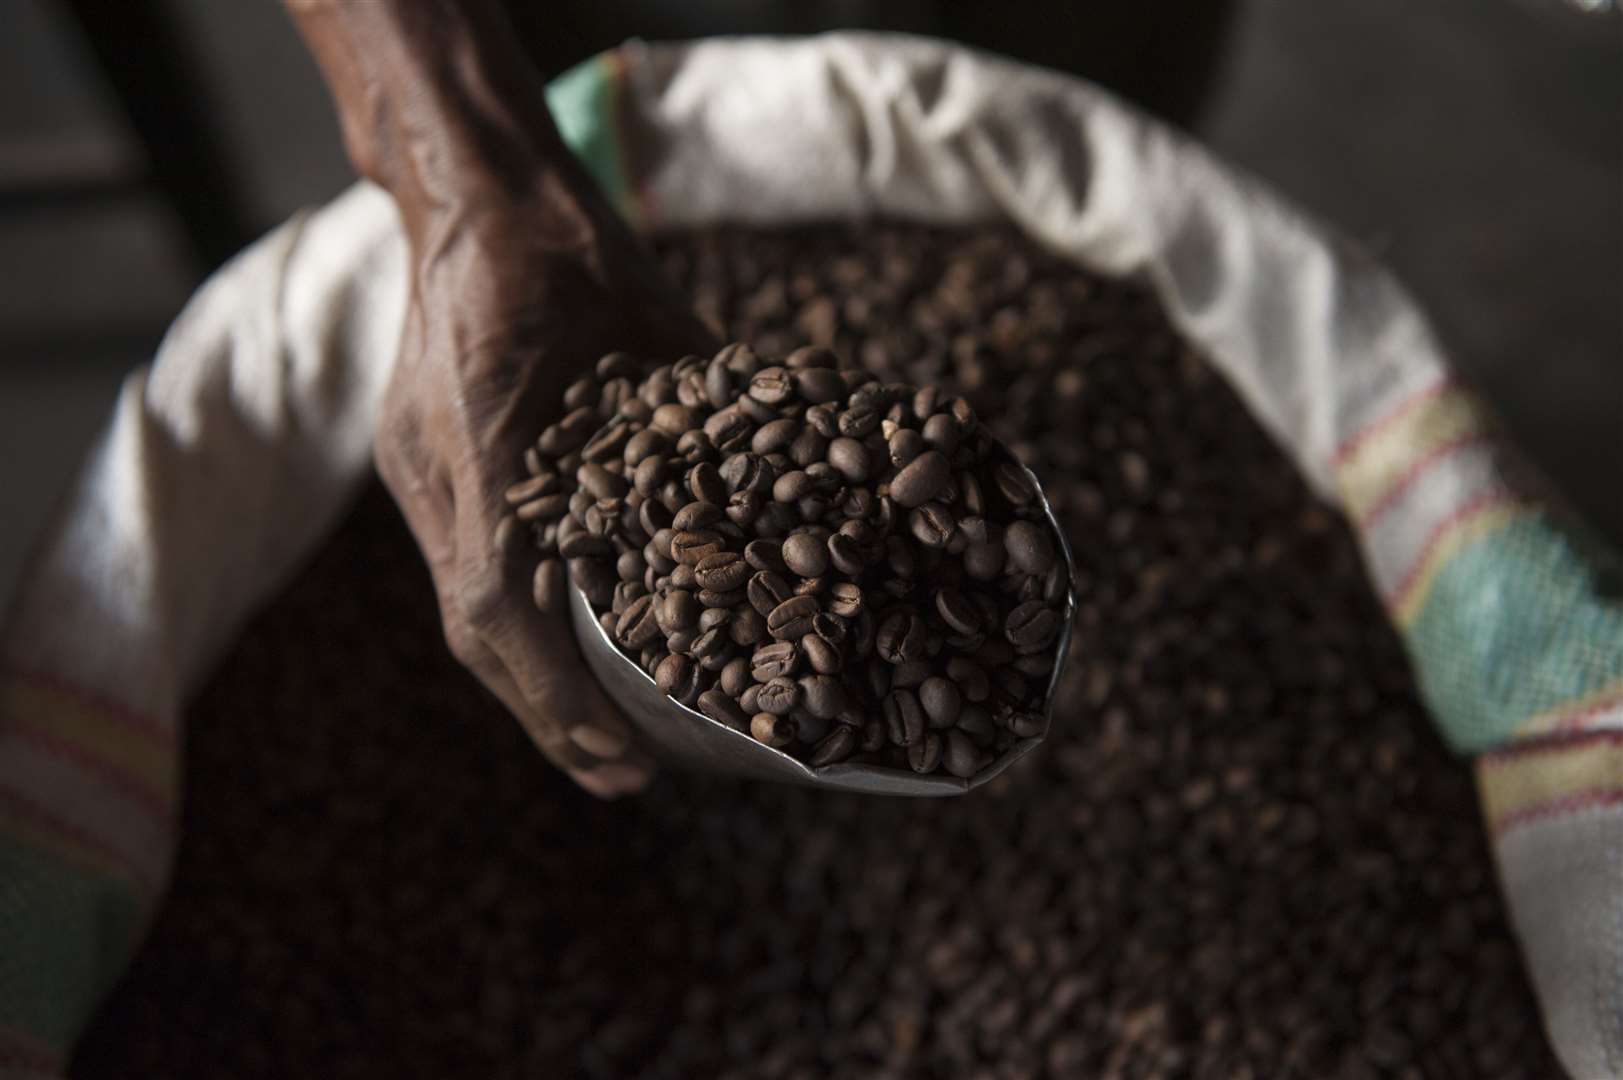 Researchers suggest it is not the caffeine in the coffee beans that is beneficial, but instead more than 100 biologically active compounds (Juergen Freund/WWF/PA)